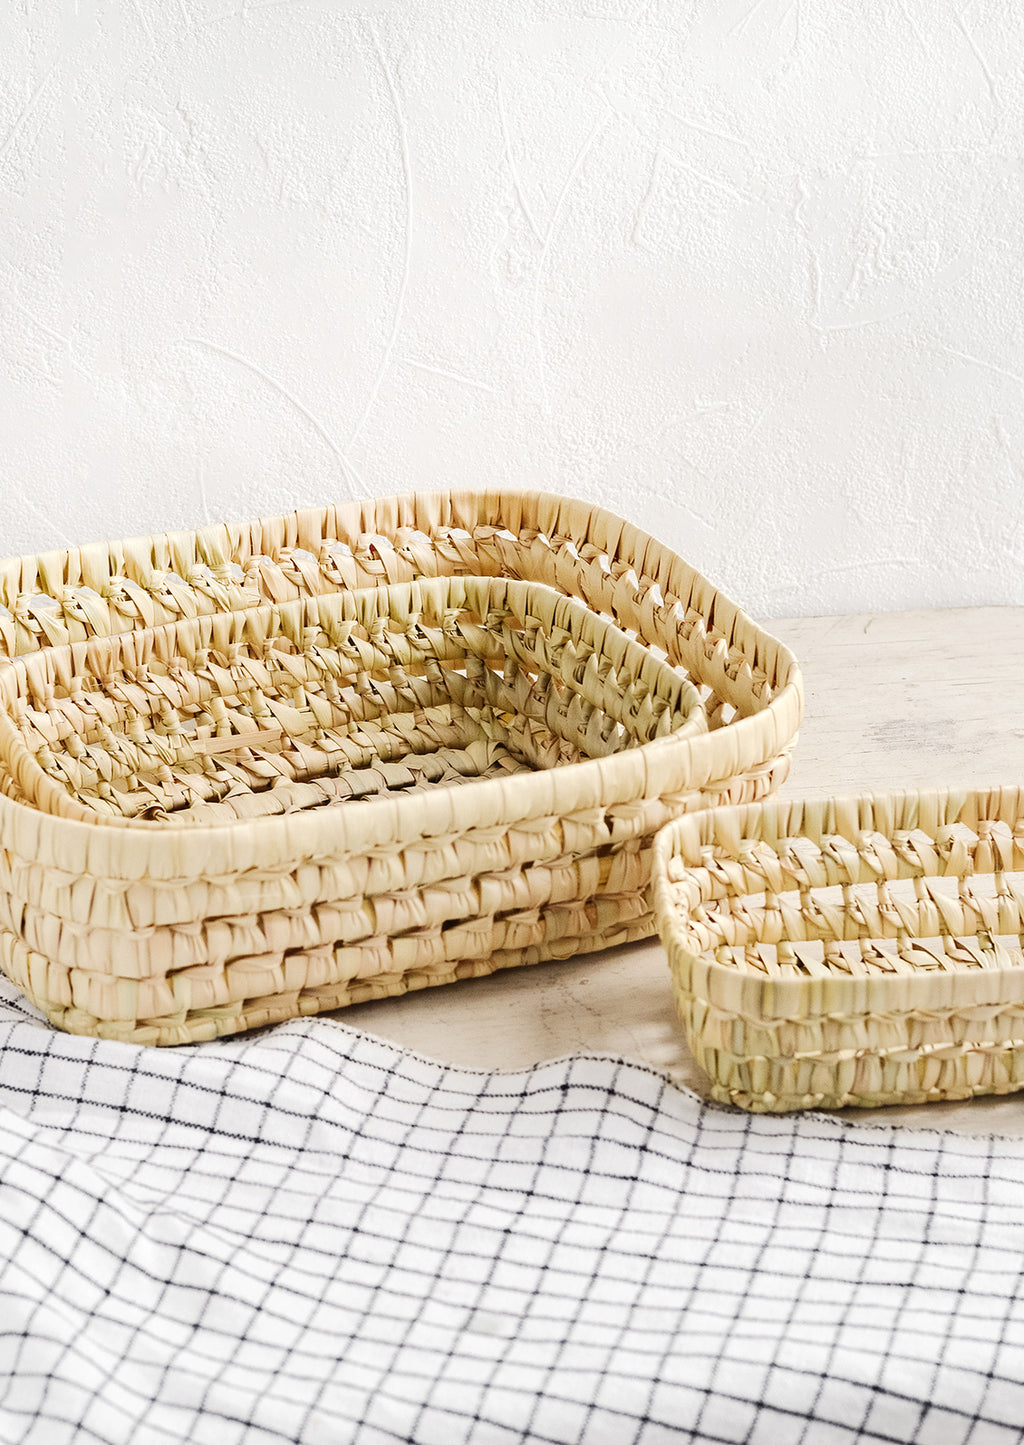 5: A collection of shallow nesting baskets made from palm leaf.